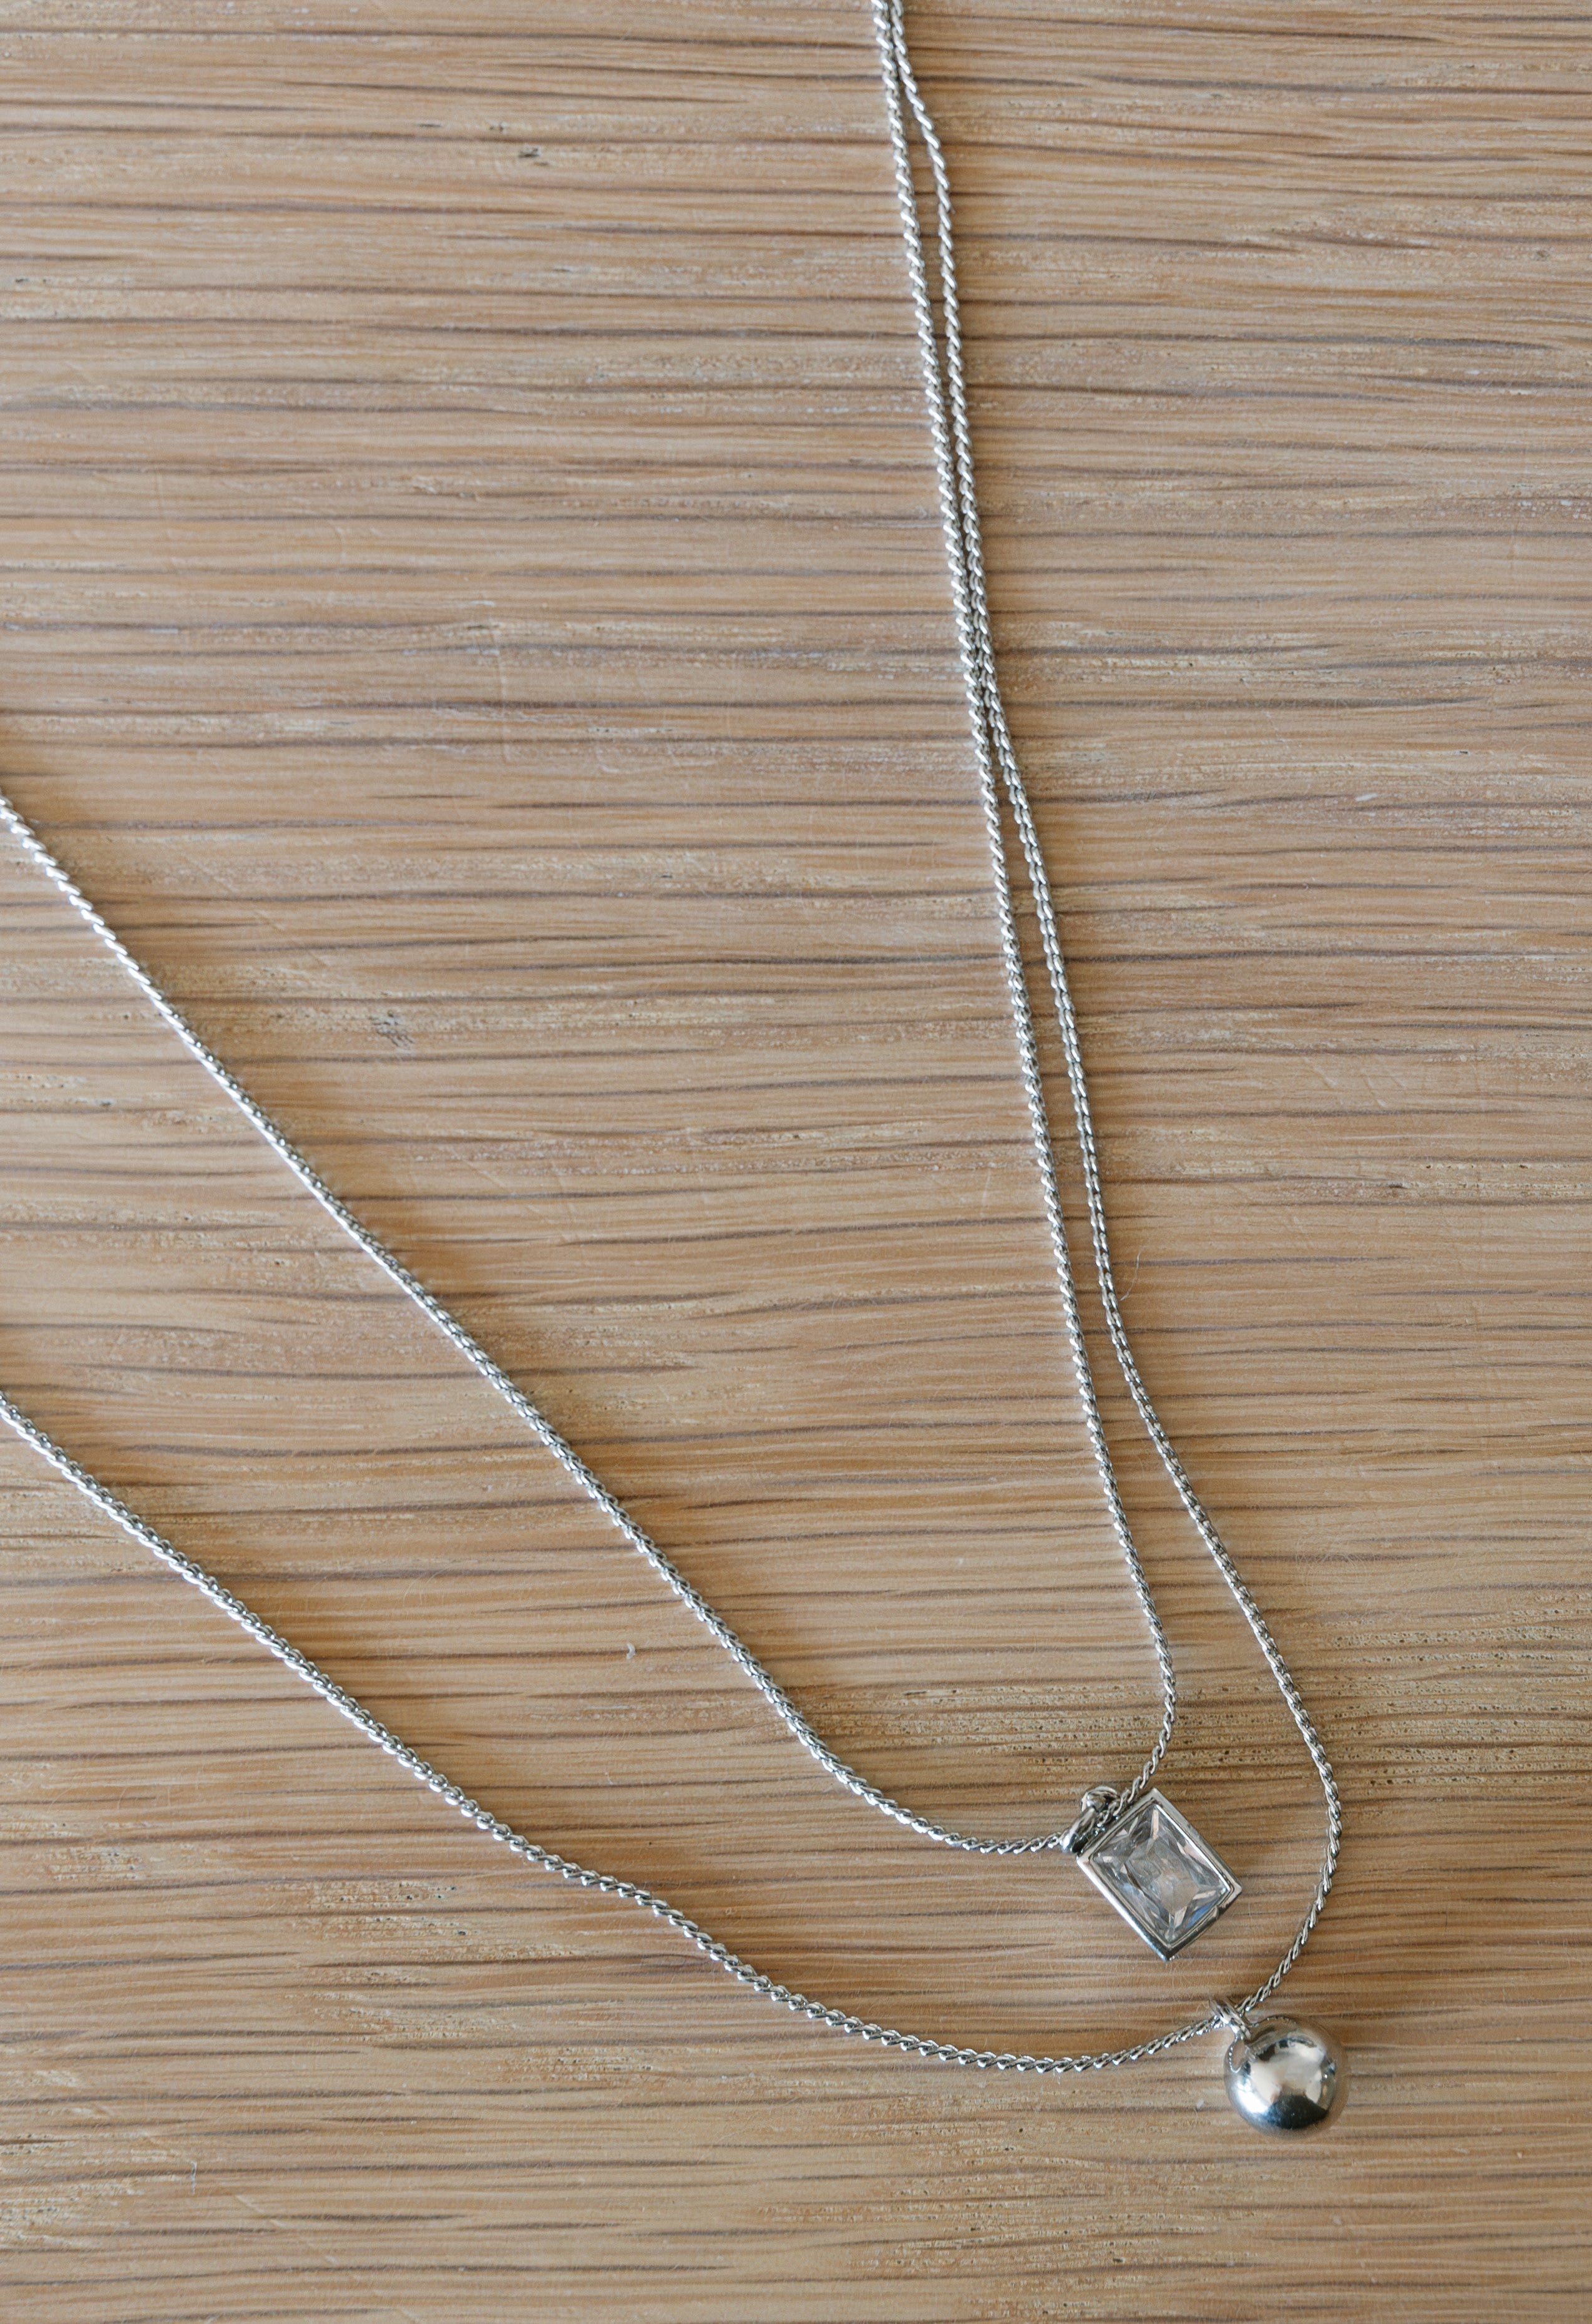 Seattle Necklace - SILVER - willows clothing Necklace